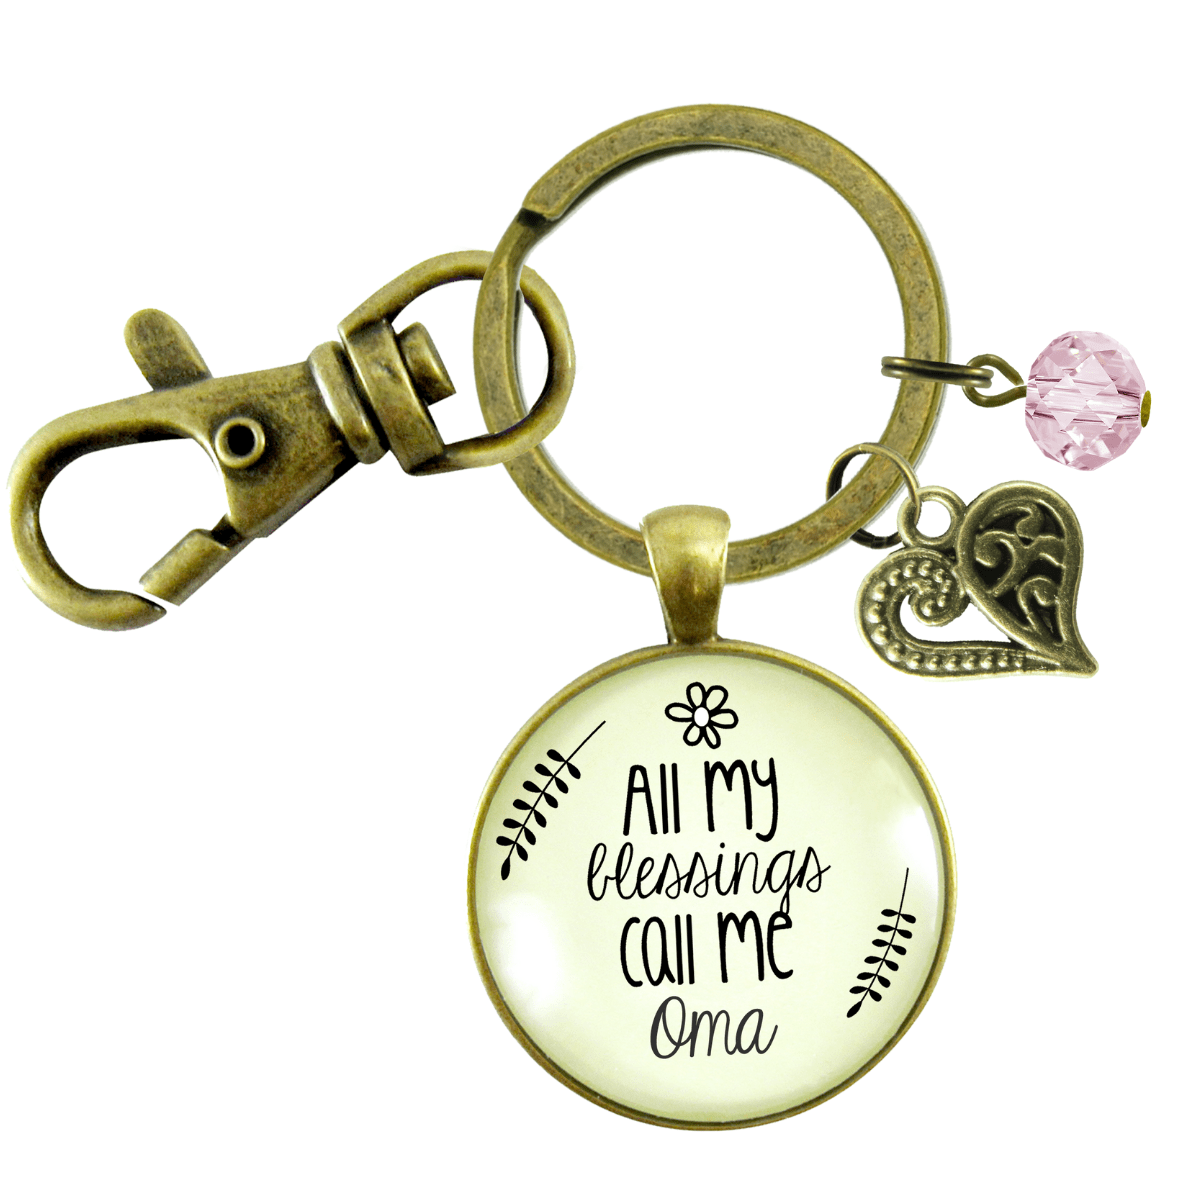 Oma Keychain All My Blessings German Grandma Womens Family Gift Jewelry - Gutsy Goodness Handmade Jewelry;Oma Keychain All My Blessings German Grandma Womens Family Gift Jewelry - Gutsy Goodness Handmade Jewelry Gifts